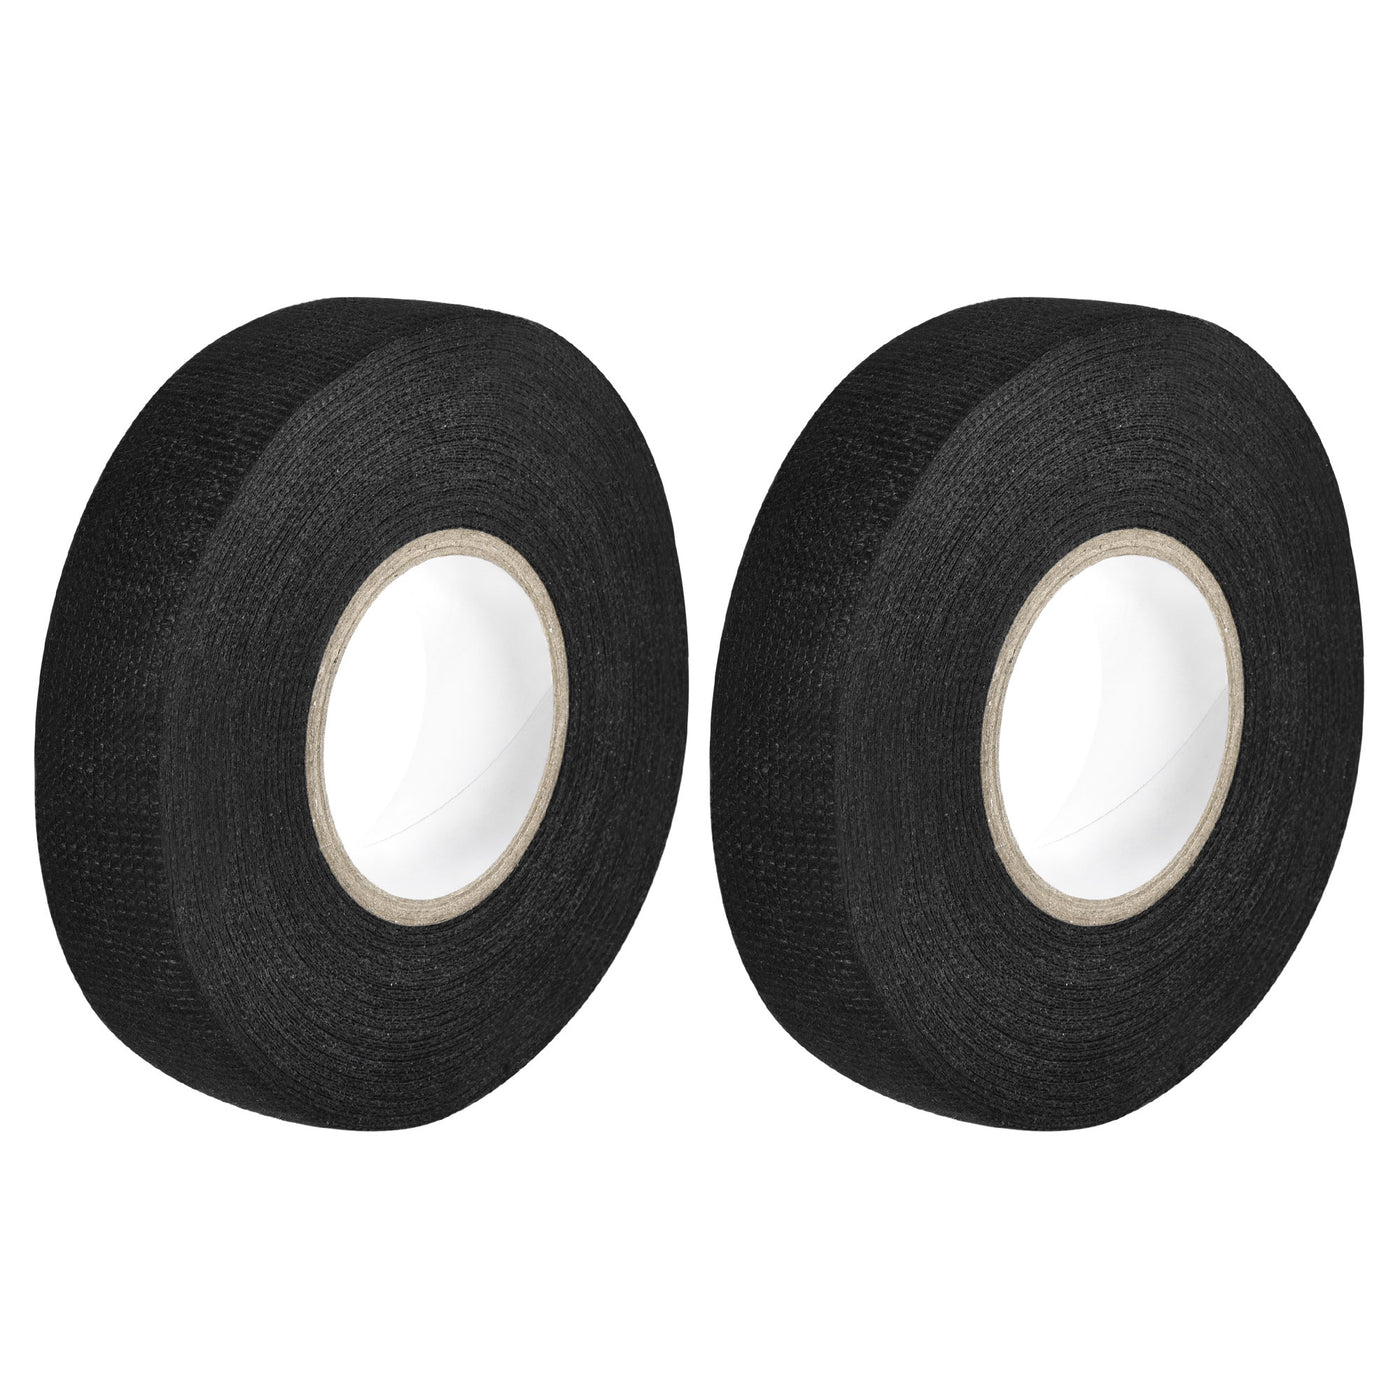 uxcell Uxcell Adhesive Cloth Fabric Tape Wire Harness Looms Single-Side 19mm x 15m Black 2 Pcs